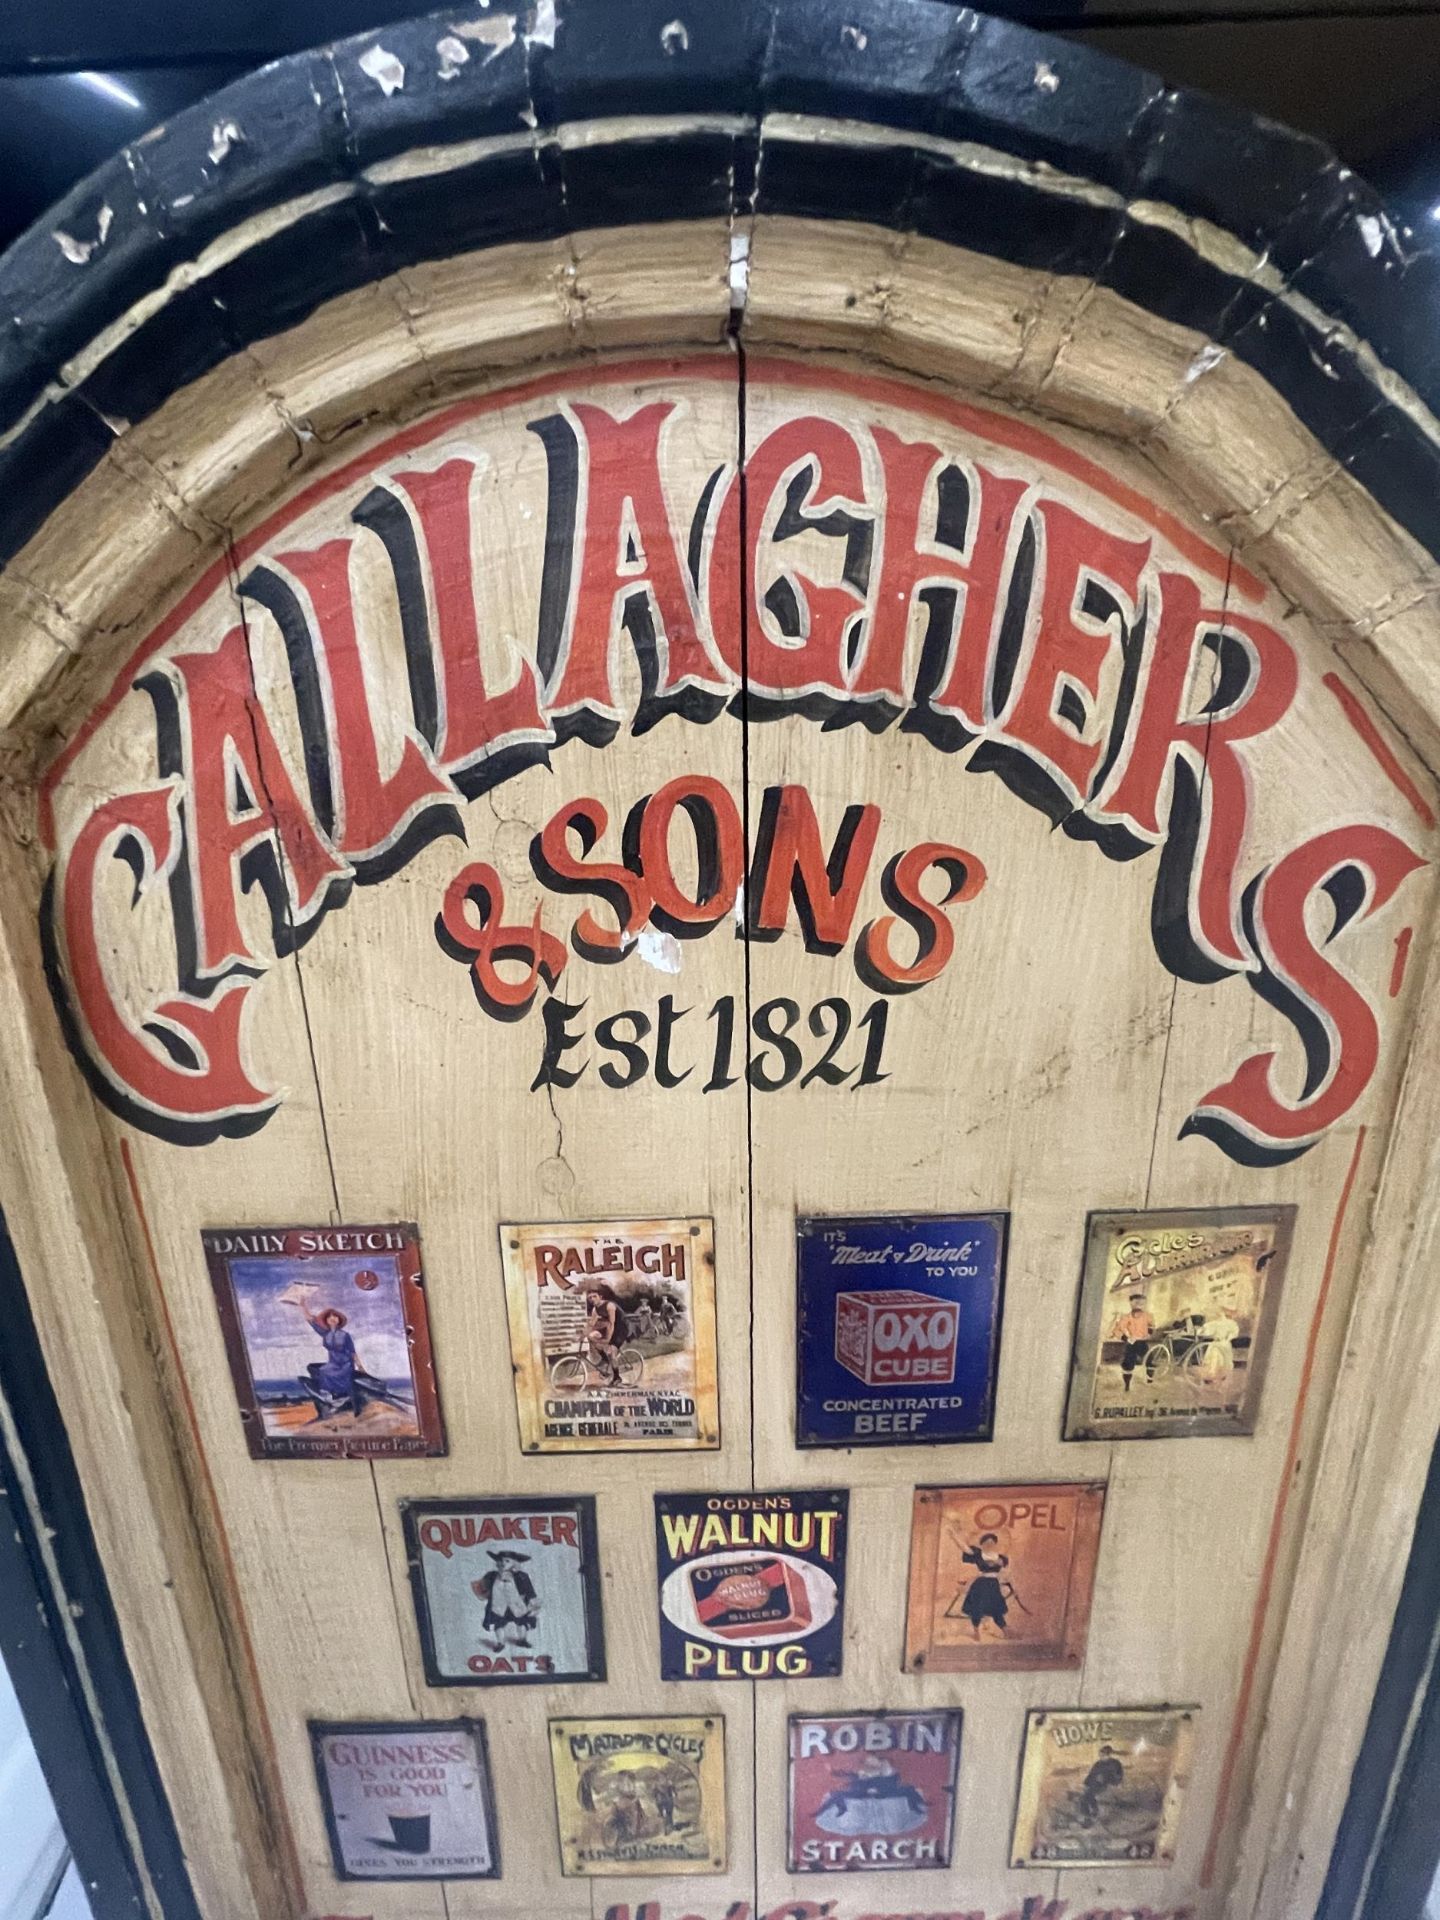 A VINTAGE GALLAGHERS & SONS WOODEN SIGN - Image 2 of 3